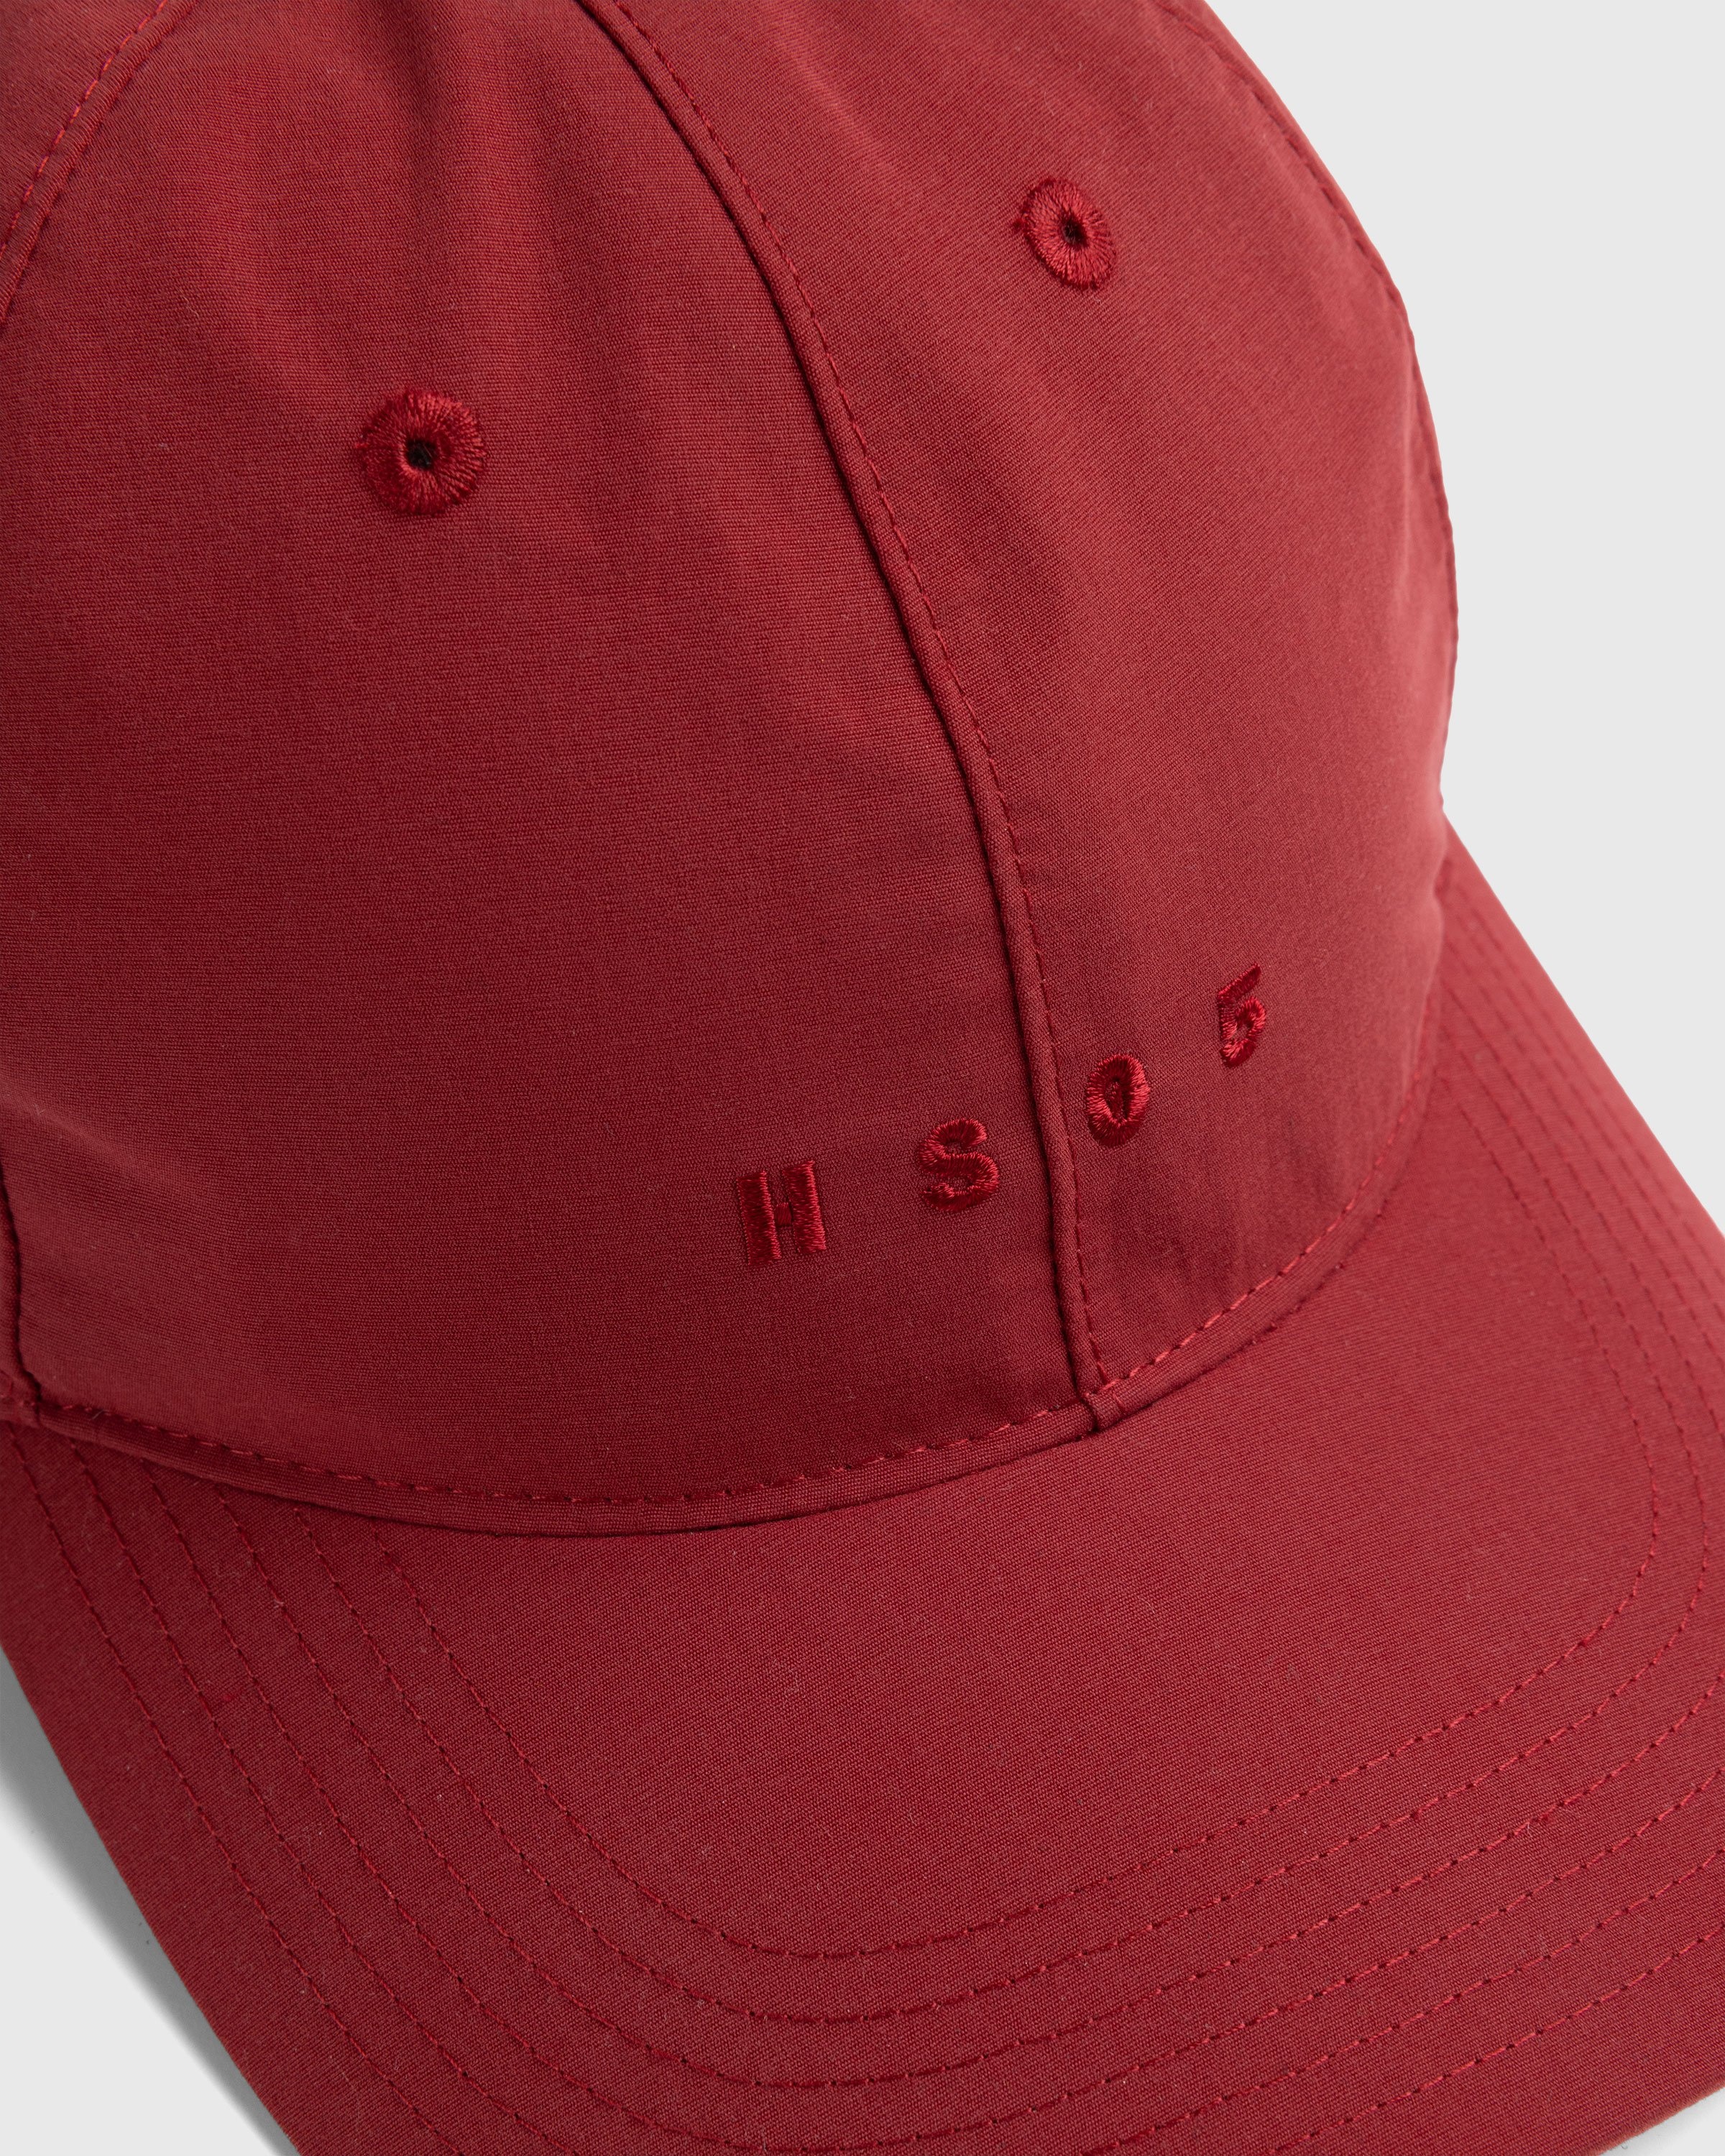 Highsnobiety HS05 – 3 Layer Taped Nylon Cap Red - Hats - Red - Image 5